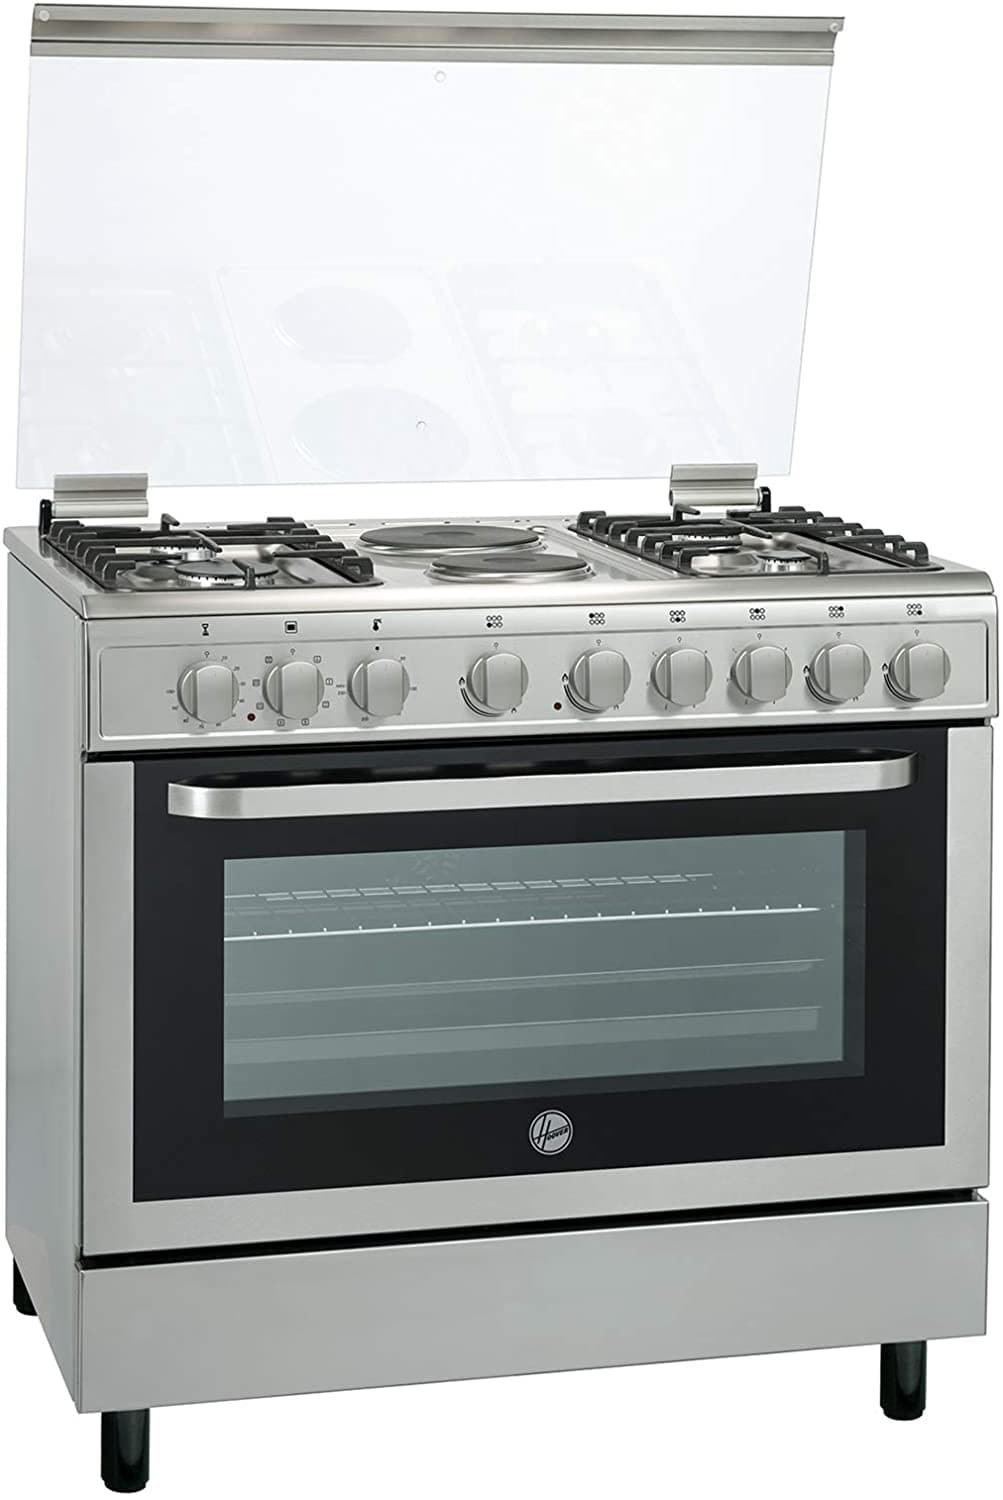 HOOVER 90 X 60 4 GB 2 HOT PLATE COOKER WITH FULL SAFETYSS-FGC9042-3DEX - Jashanmal Home